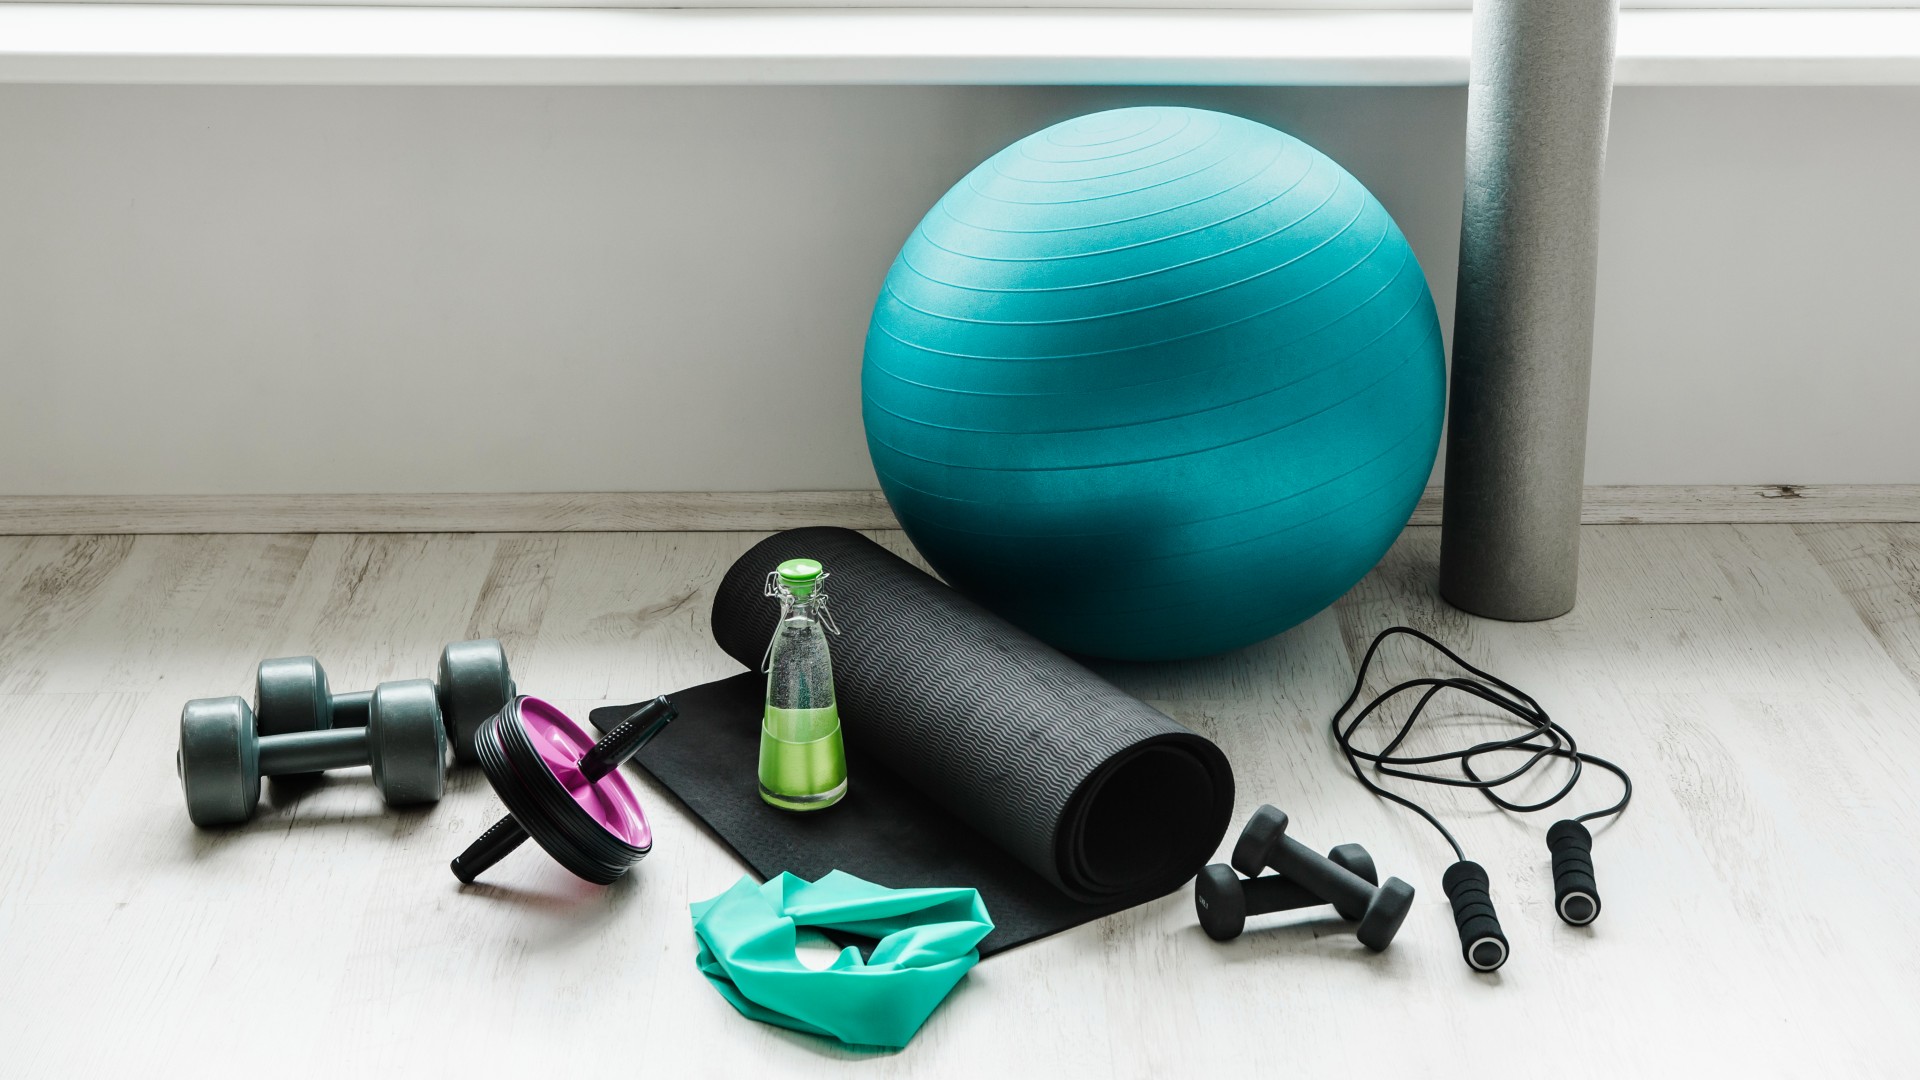 Best Budget Home Workout Equipment For Beginners [in 2023]